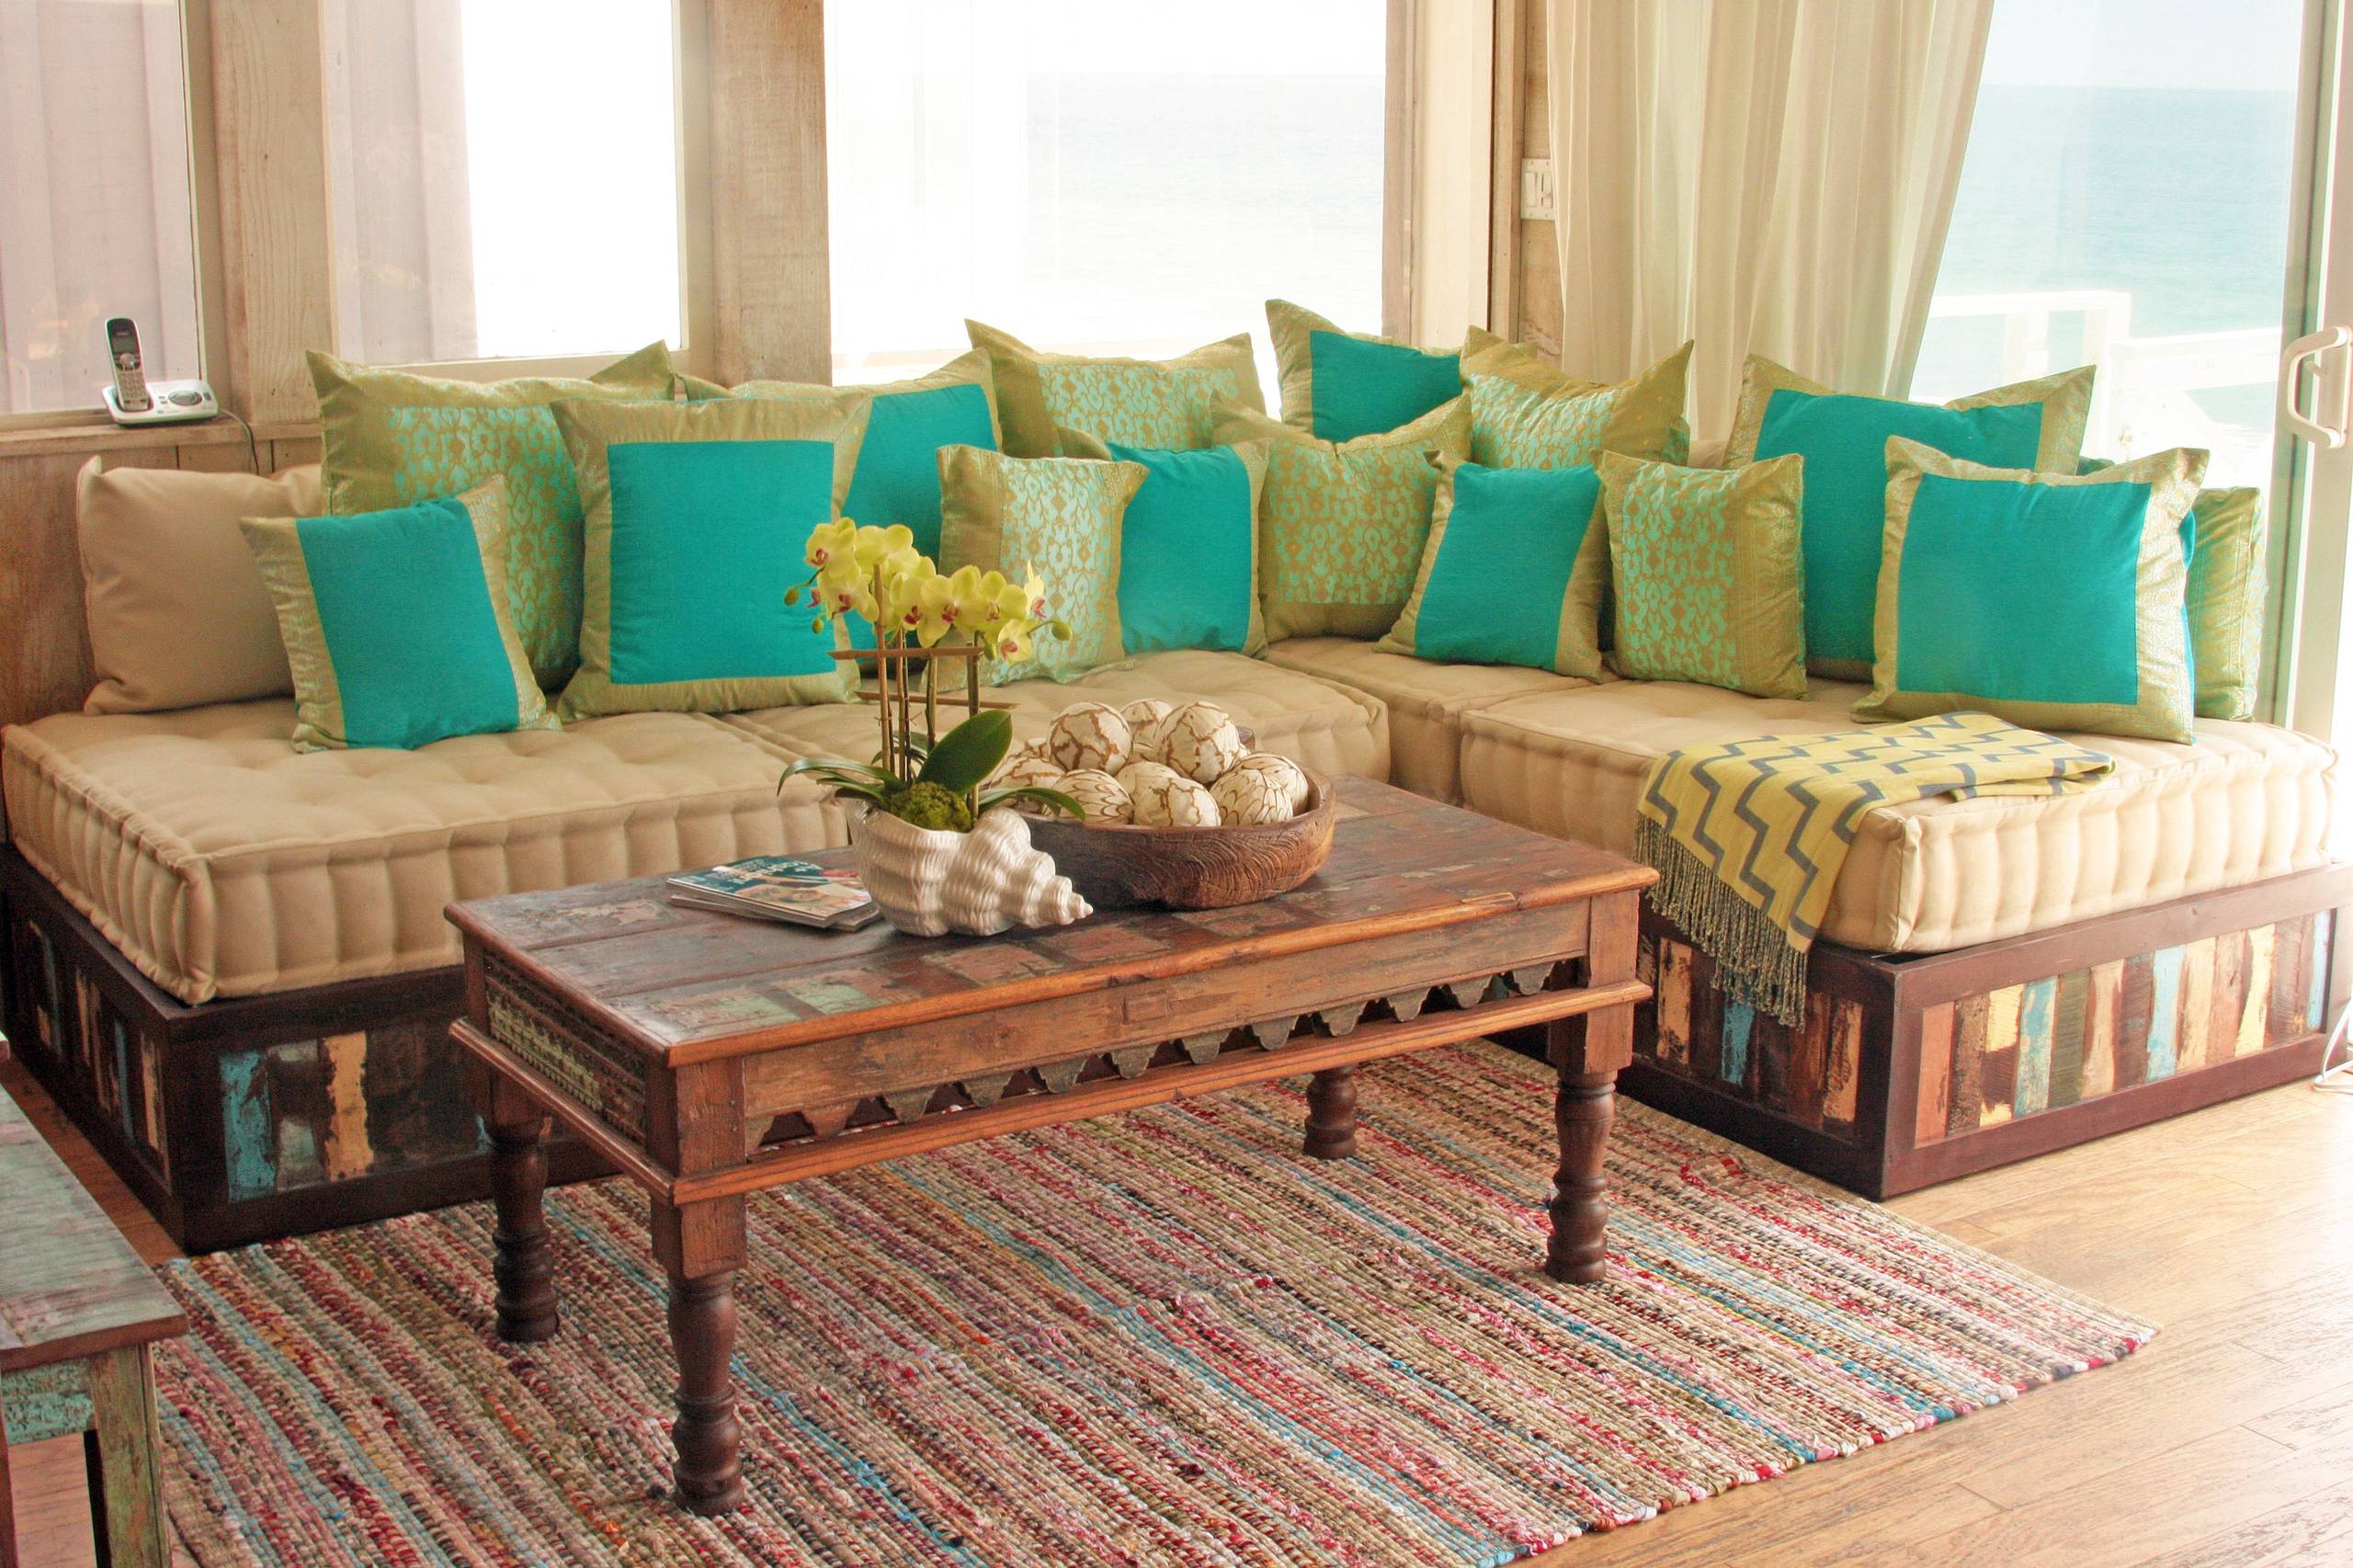 Moroccan Style Sofa in Reclaimed Wood - Eclectic - Living Room - Los  Angeles - by Tara Design | Houzz